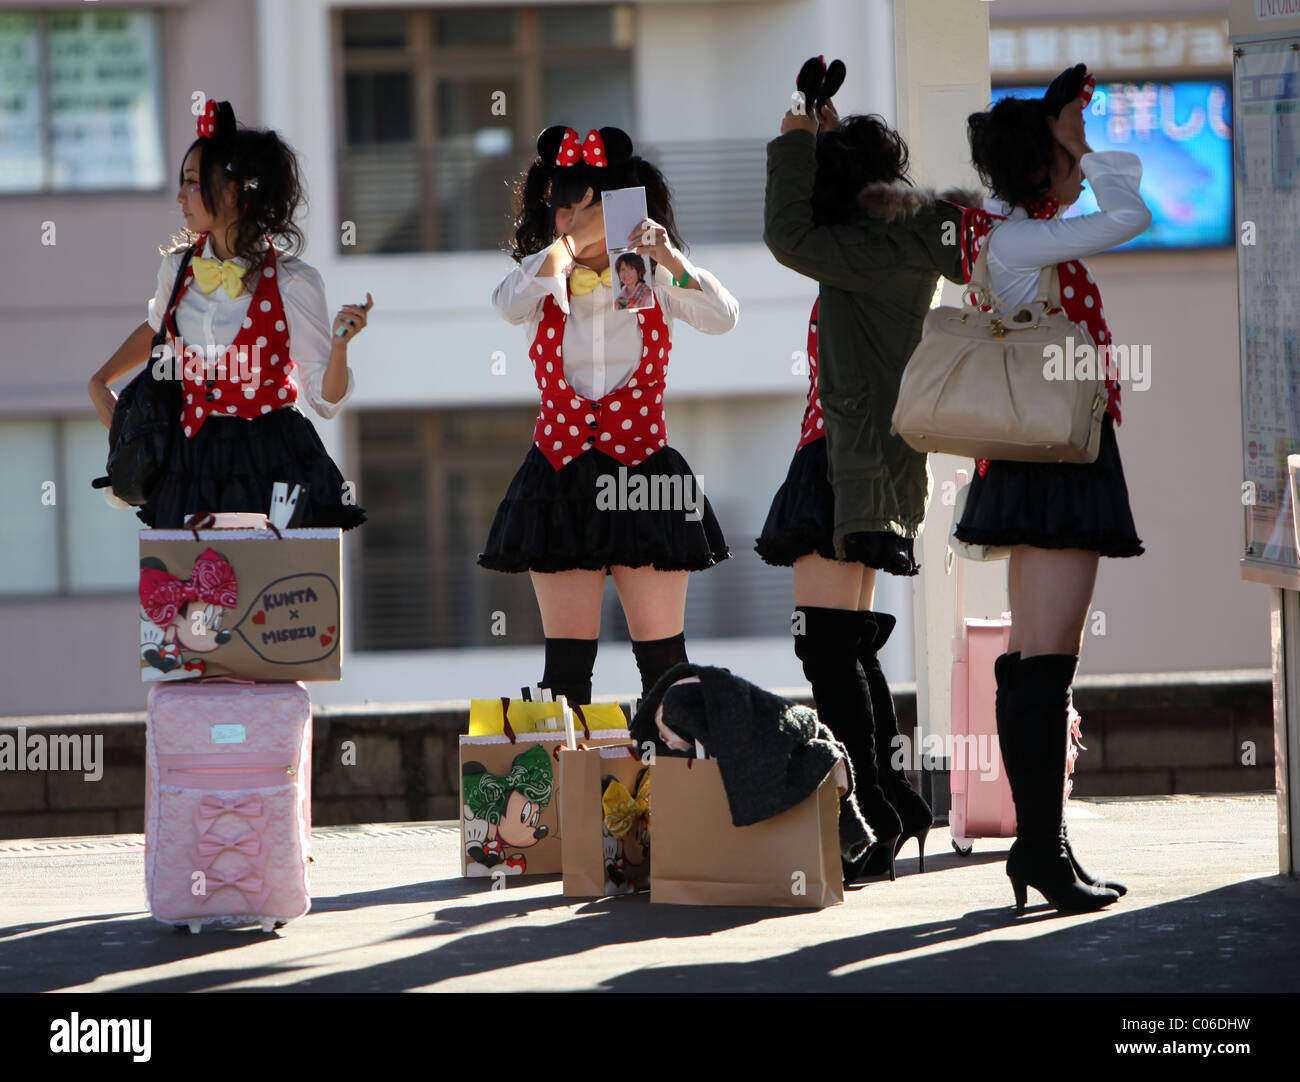 Japanese girls get dressed up in minnie mouse costumes, Beppu train station, Kyushu, Japan. Stock Photo